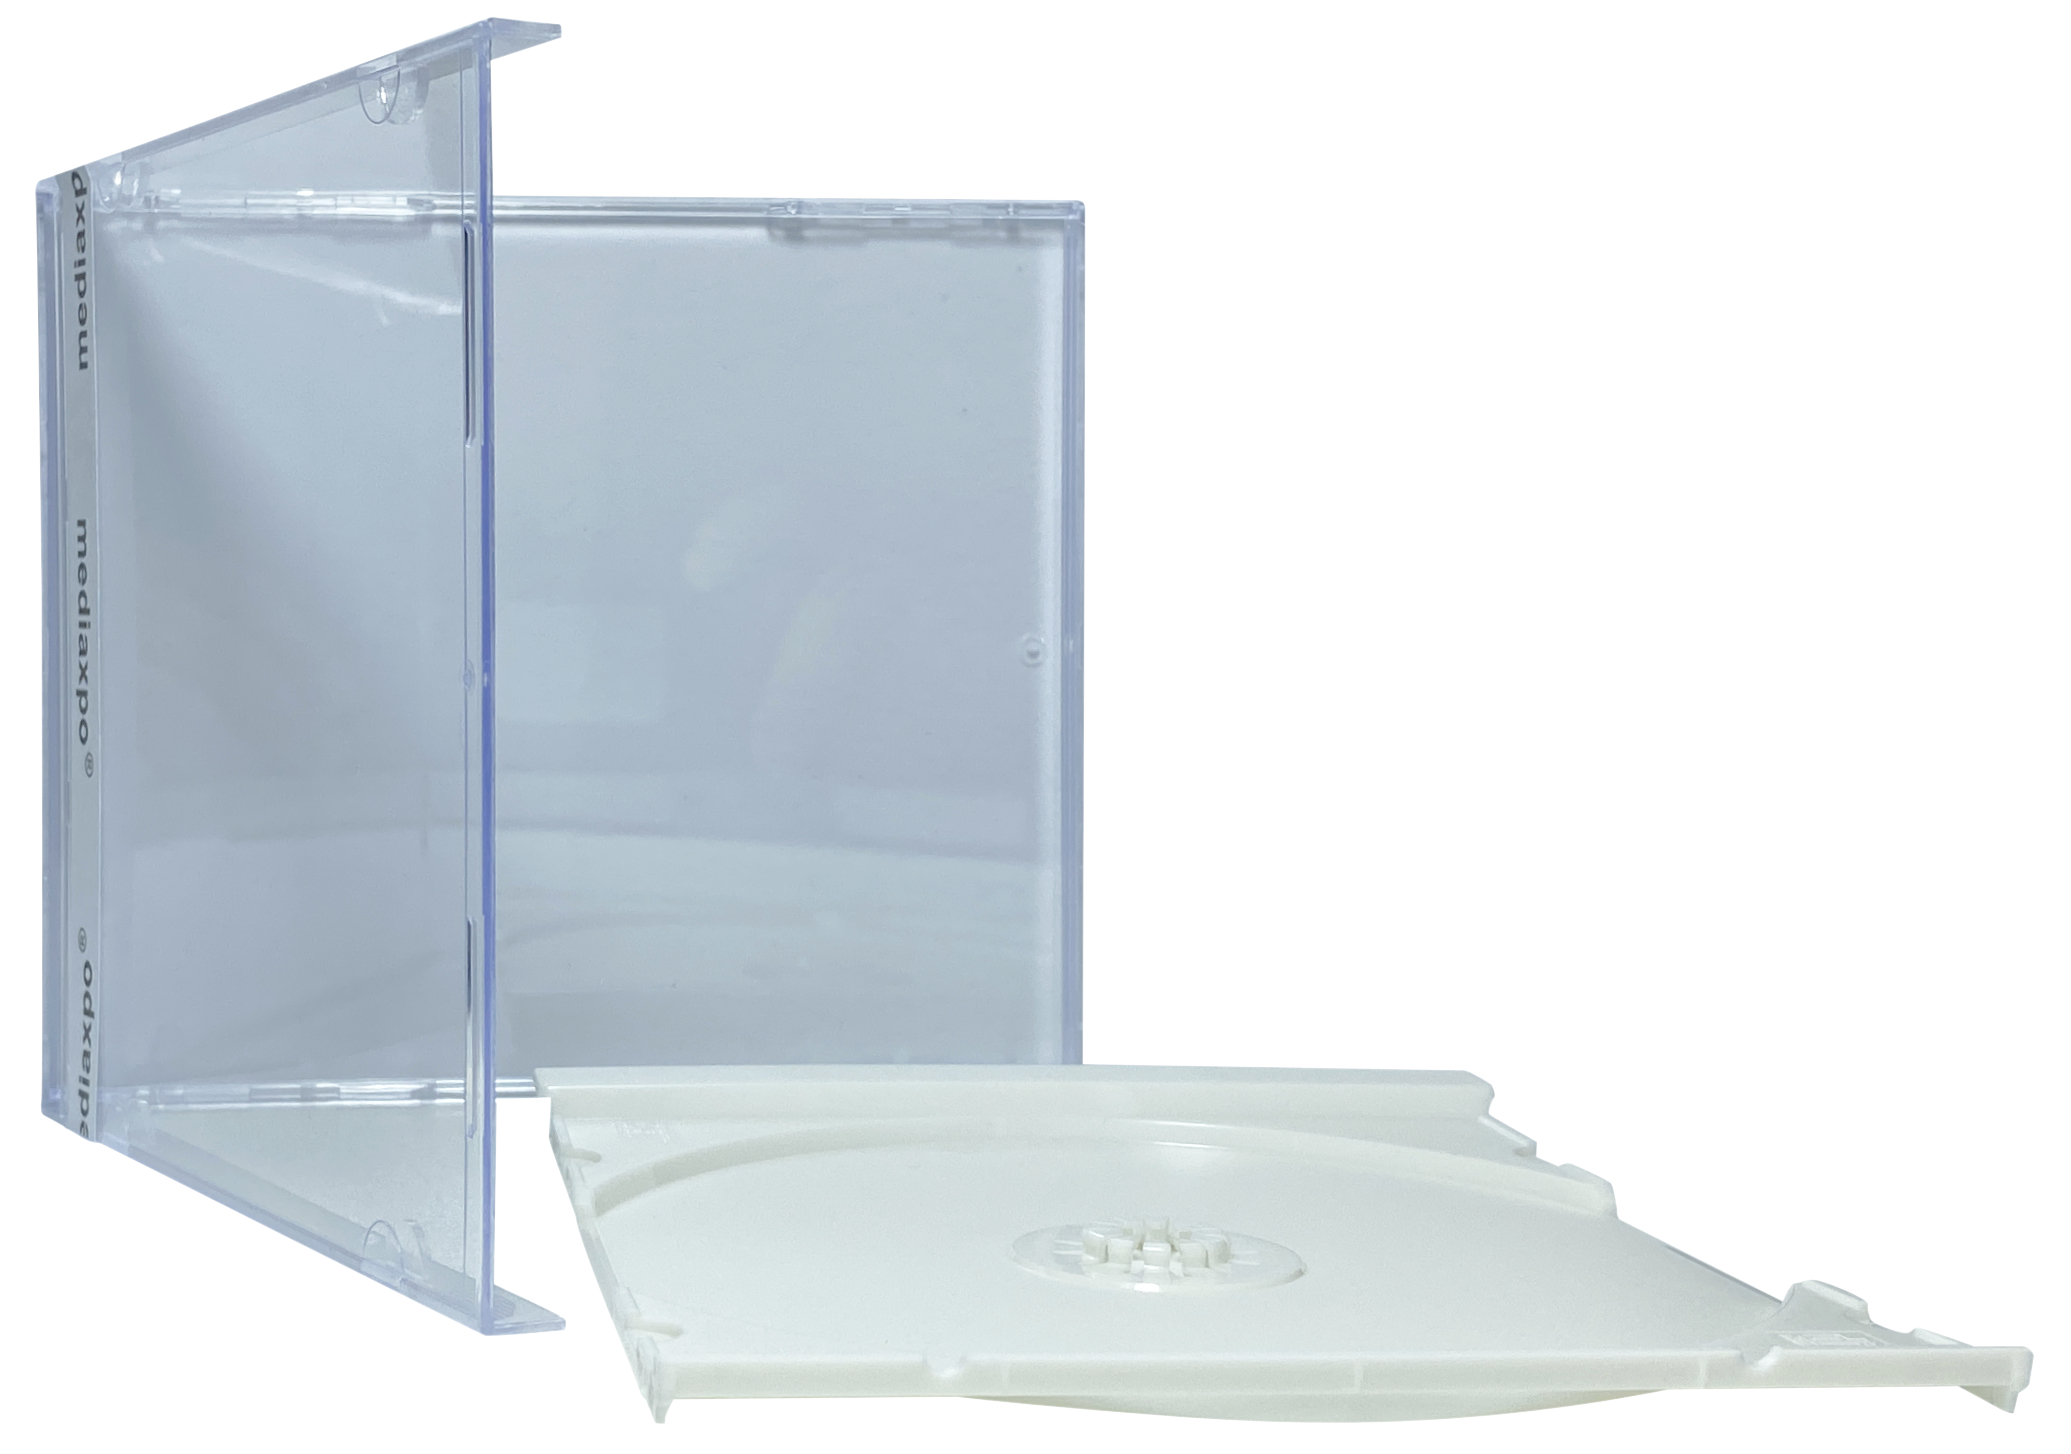 Image of ID 1214262412 2000 STANDARD White Color CD Jewel Case (Unassembled)